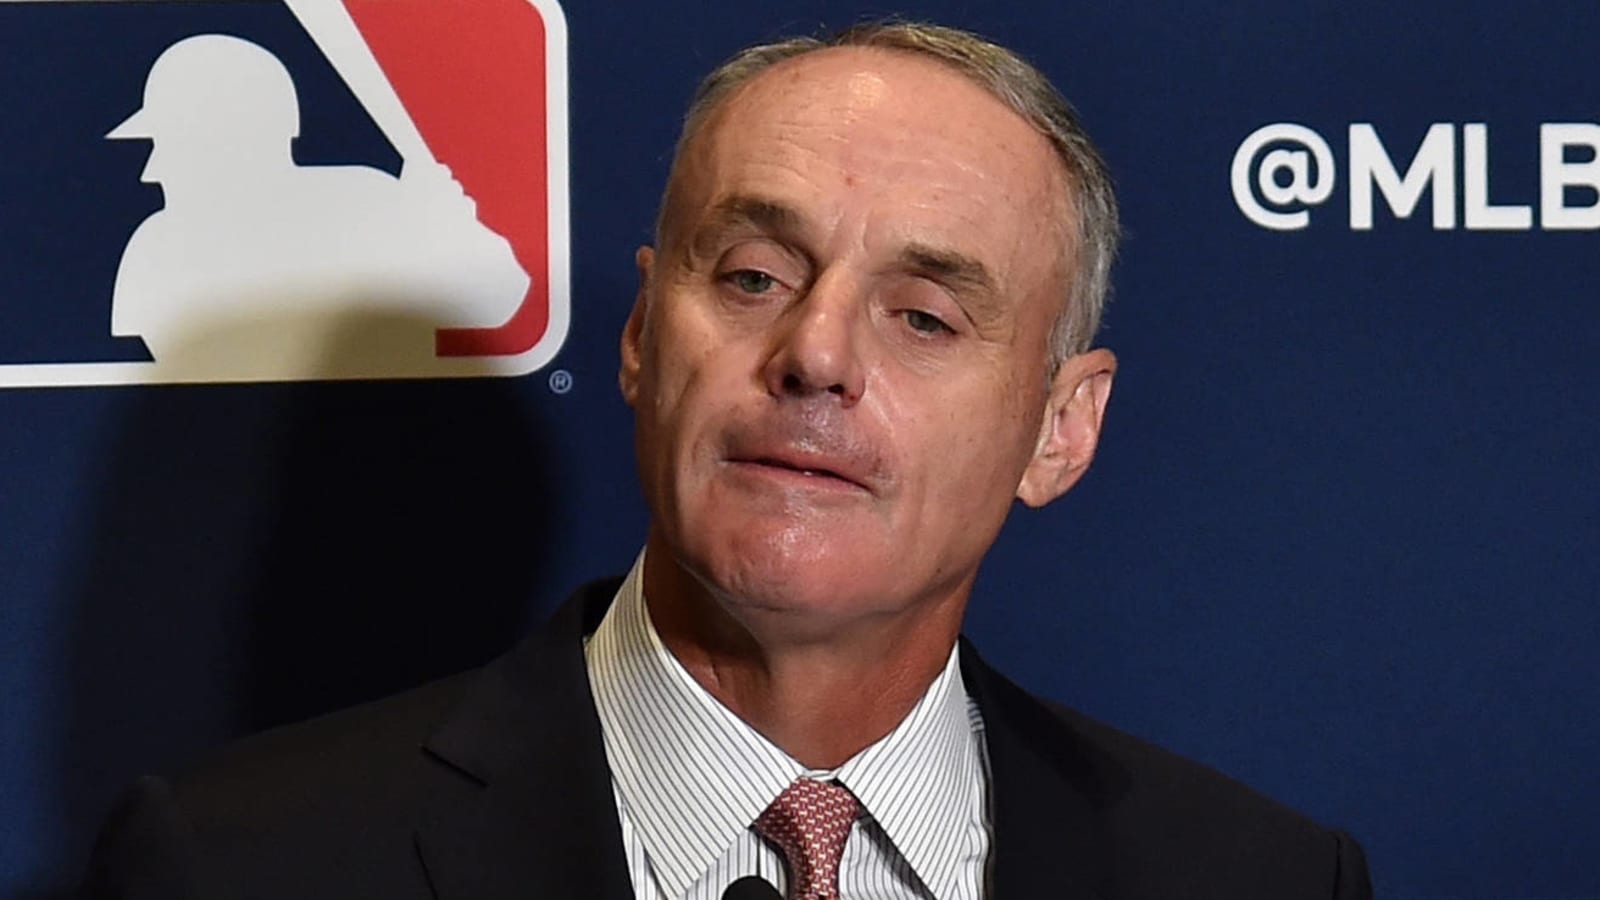 The worst may be yet to come in MLB’s owner-player standoff